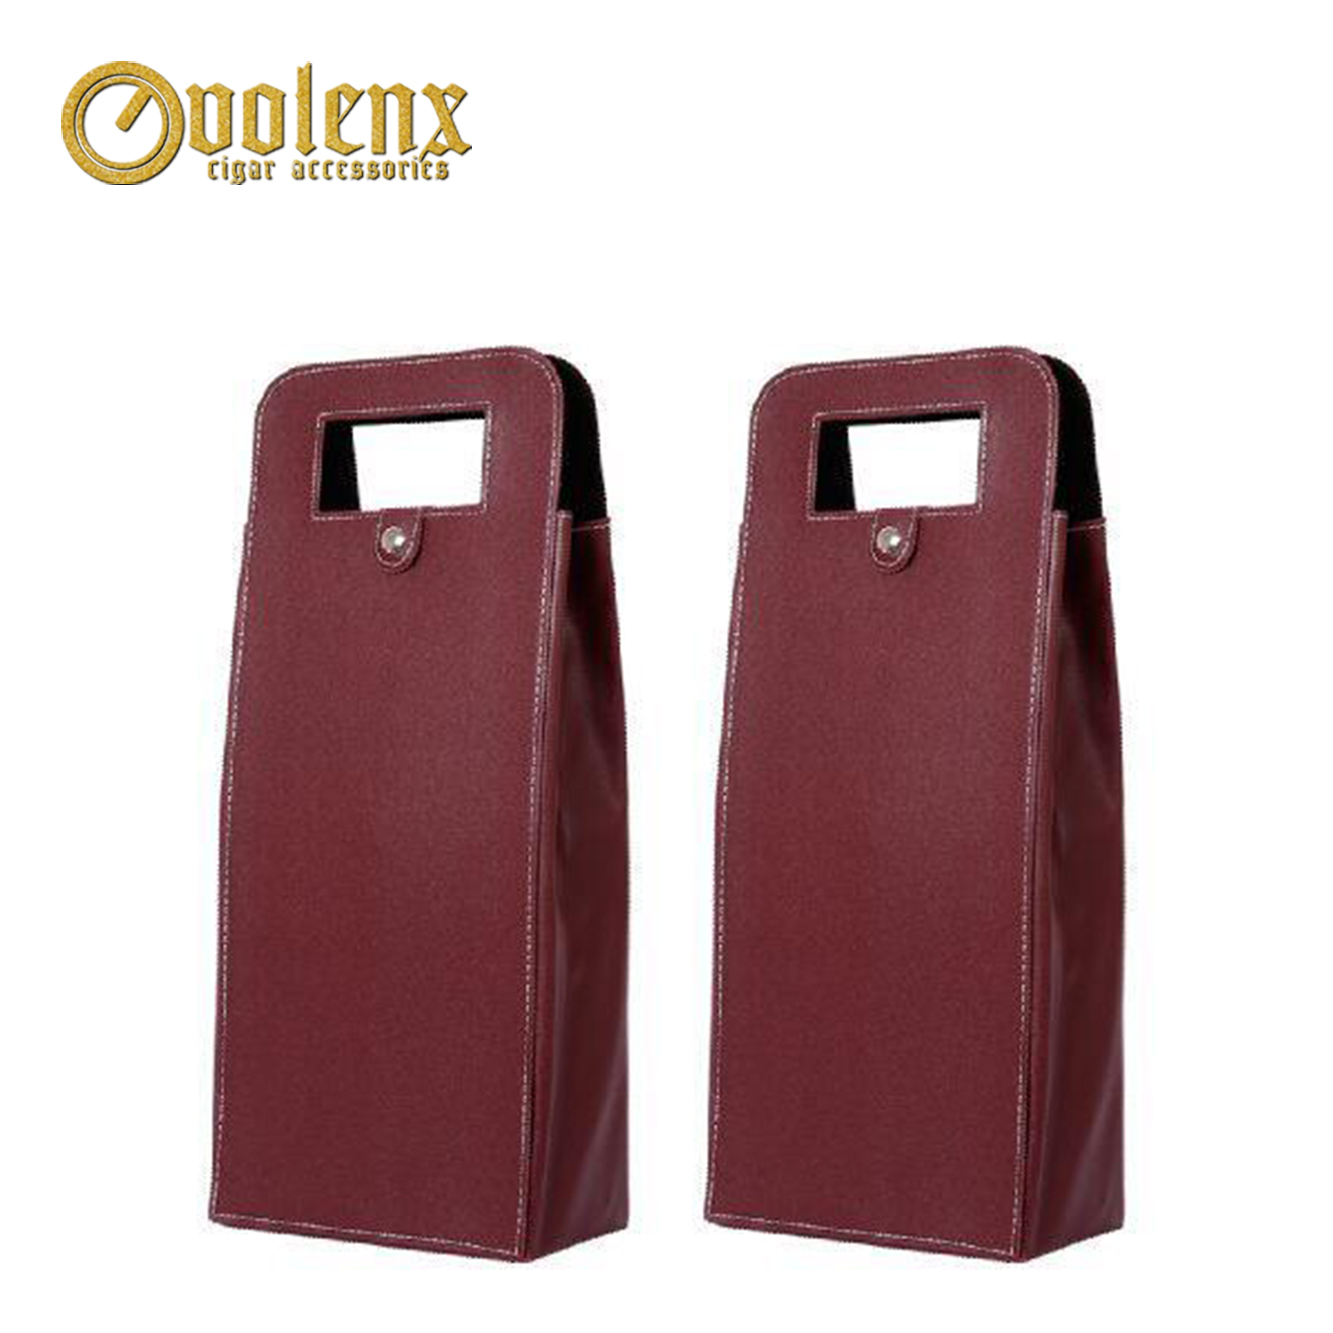 leather wine box WLW-0050 Details 8